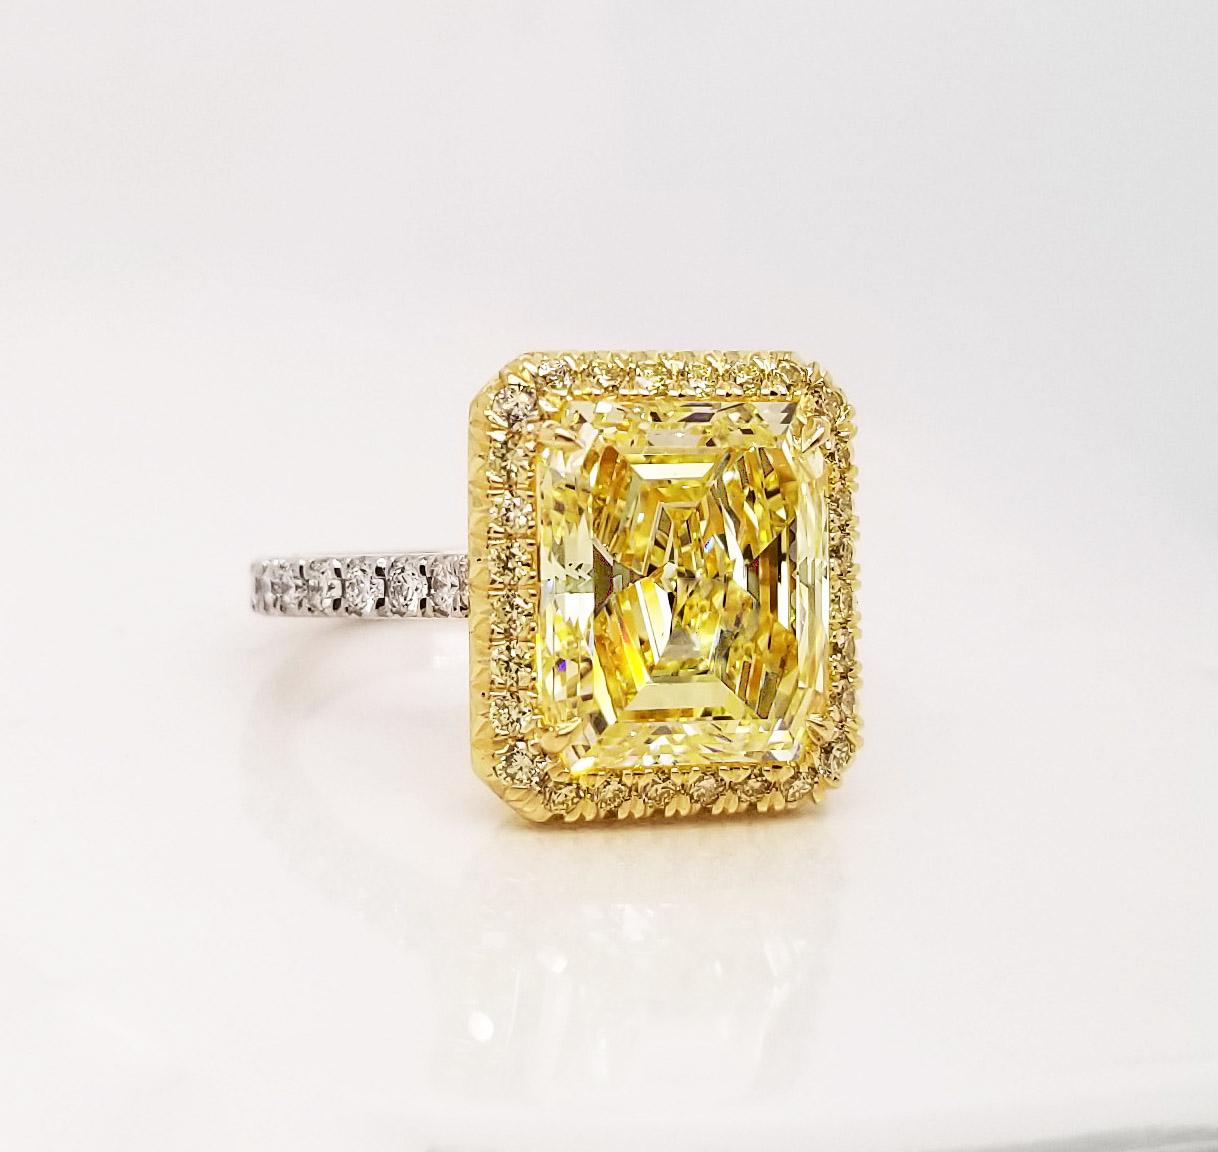 From SCARSELLI, this vibrant and spectacular 5-carat Fancy Intense Yellow Diamond GIA certified (see certificate picture for more detailed stone's information) 0.32 carats of yellow round brilliant diamonds emphasizing this astonish center natural